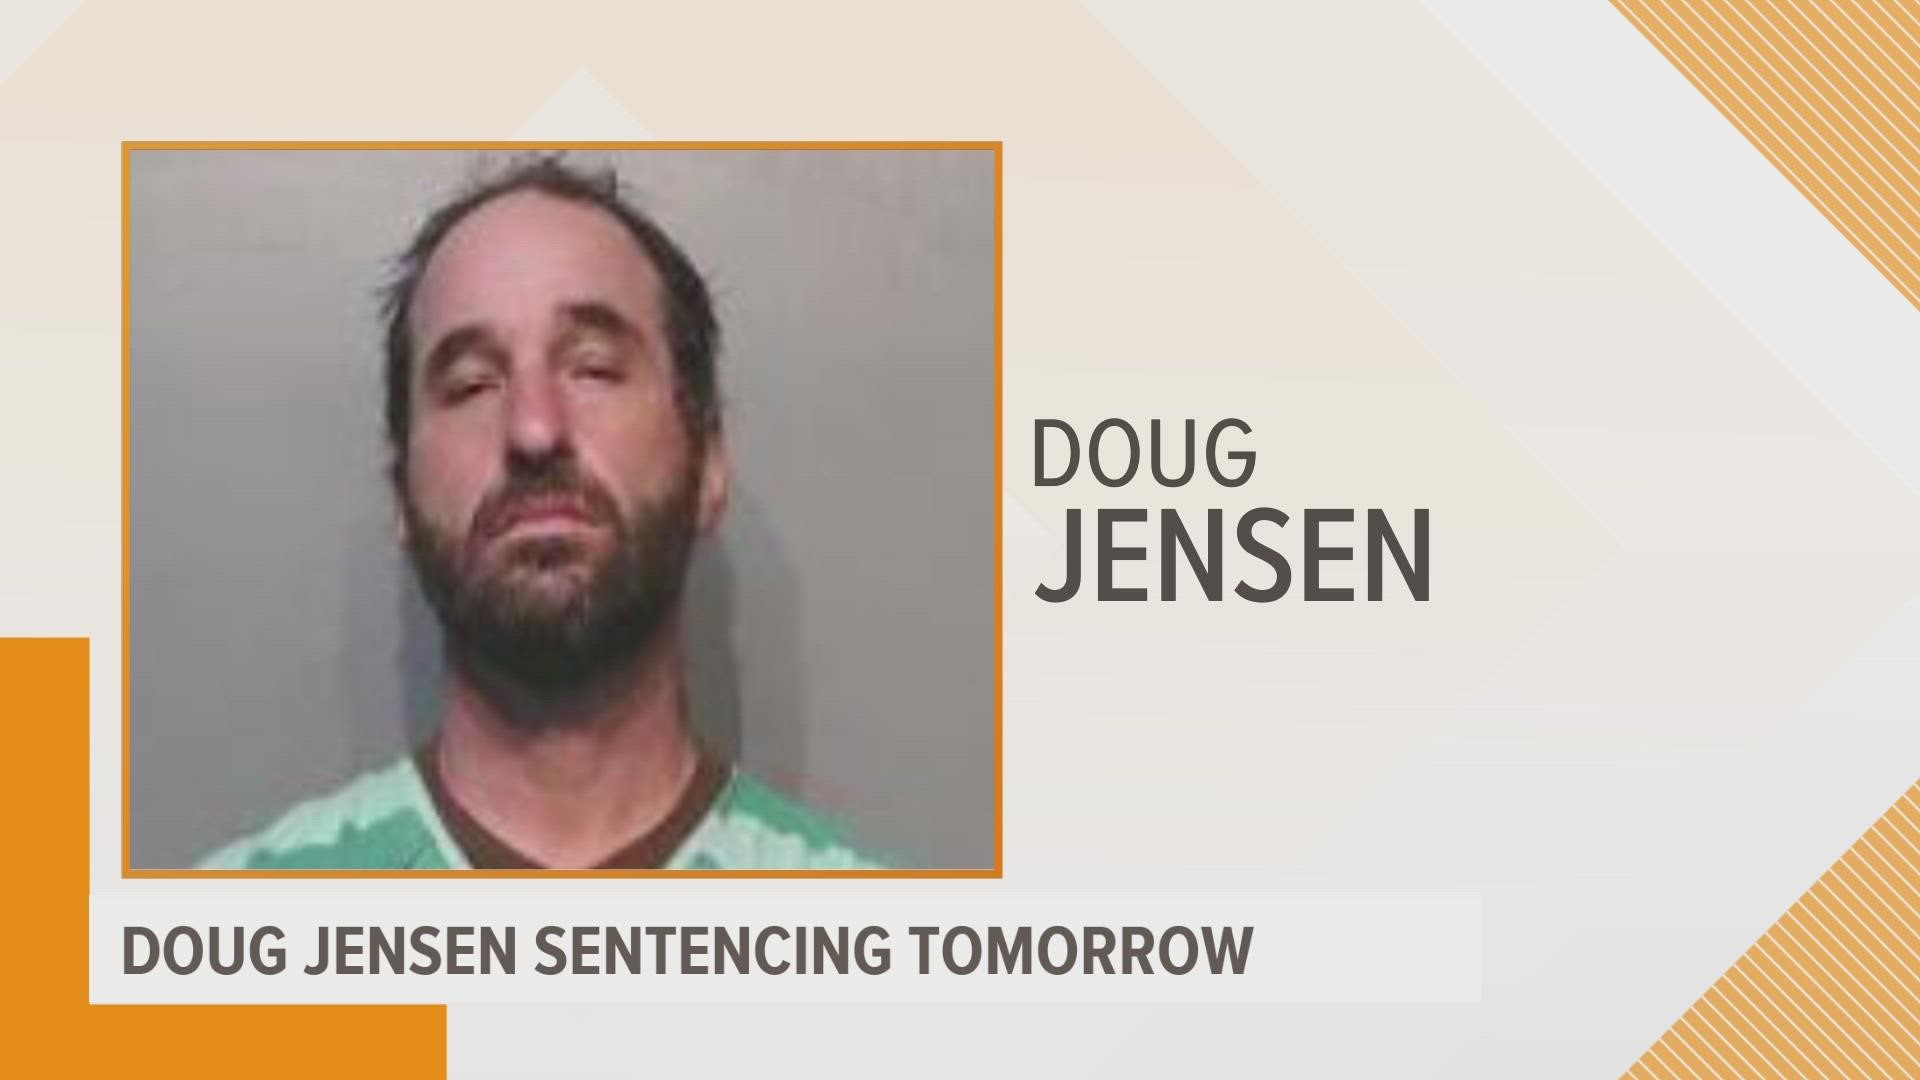 Doug Jensen was found guilty on seven counts, including unlawfully entering a restricted building with a weapon.